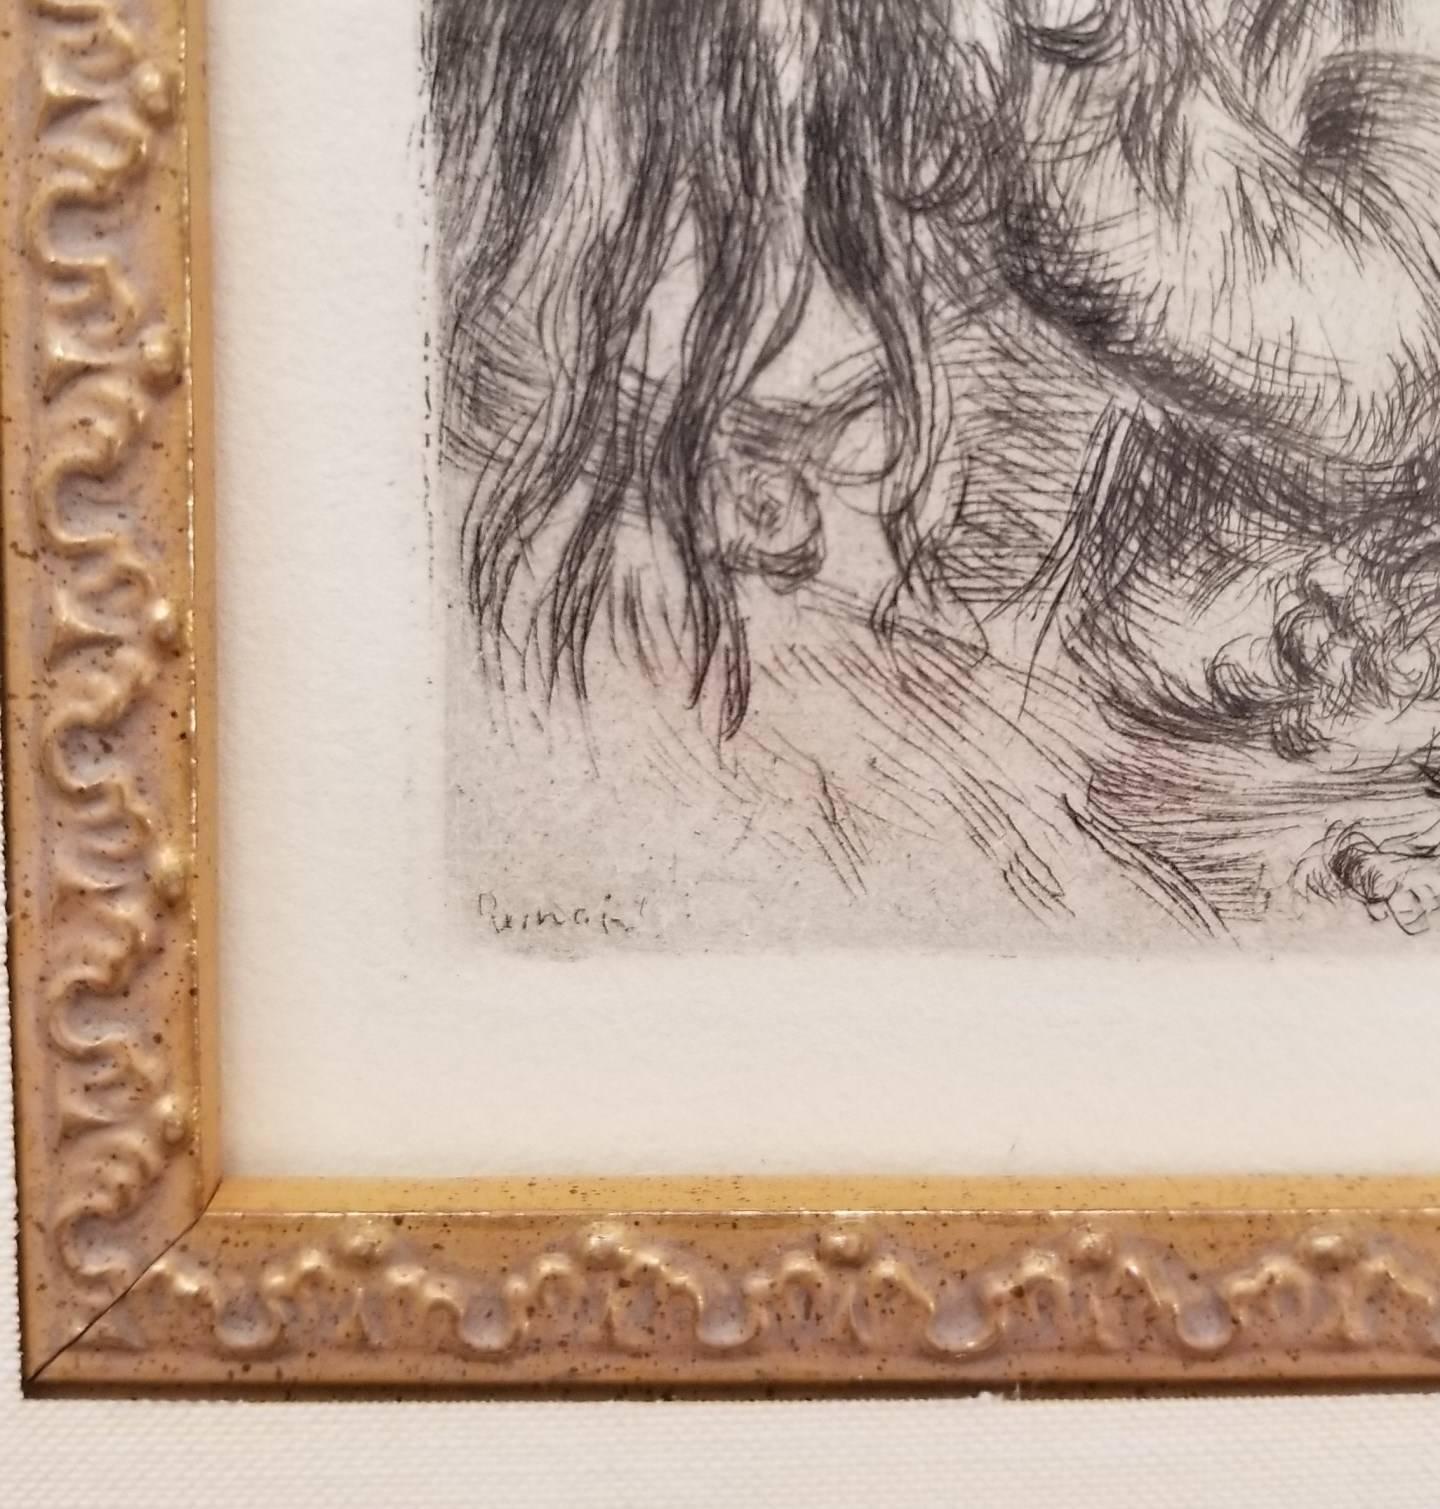 Pierre Auguste Renoir's original etching, "Le Chapeau Epingle" (The Pinned Hat) was published in 1894 by Dentu in Paris. It is a first edition impression printed upon light cream, laid paper and is signed by Renoir in the plate to the